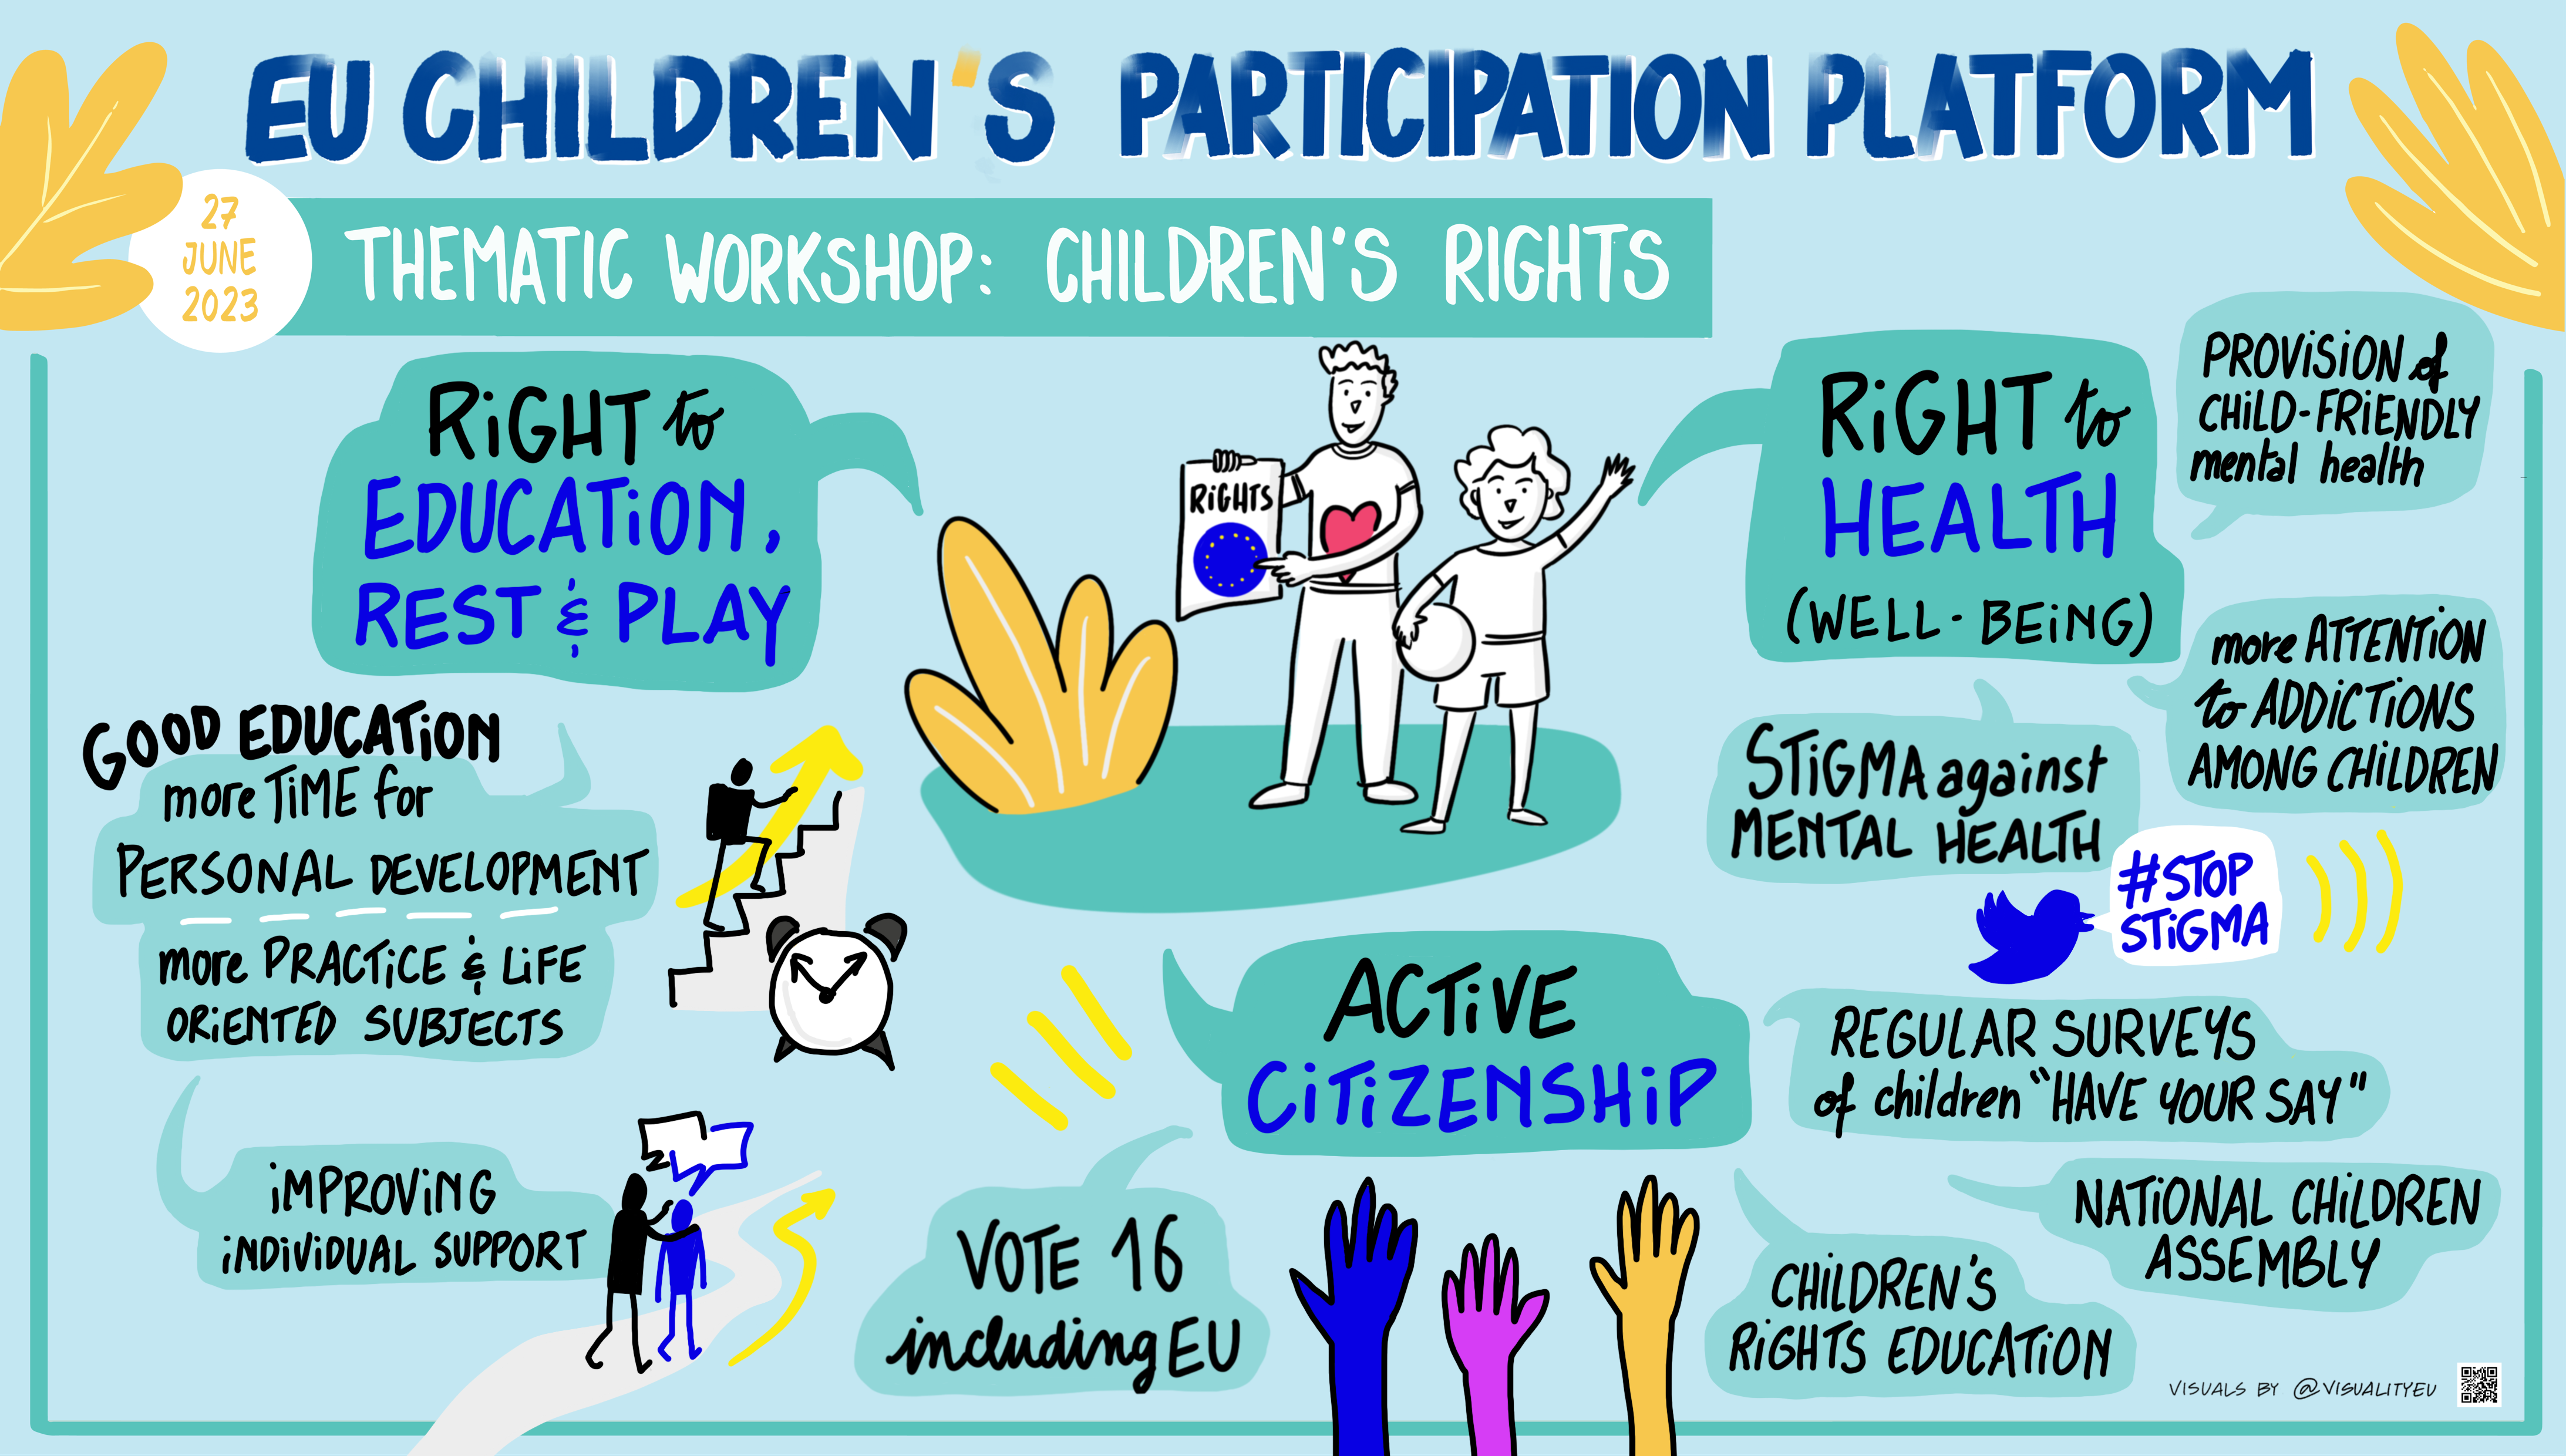 A graphic recording depicts the children's workshop focusing on children's rights. Some key rights are highlighted: the right to education, the right to rest and play, the right to health and well-being, and the right to active citizenship.